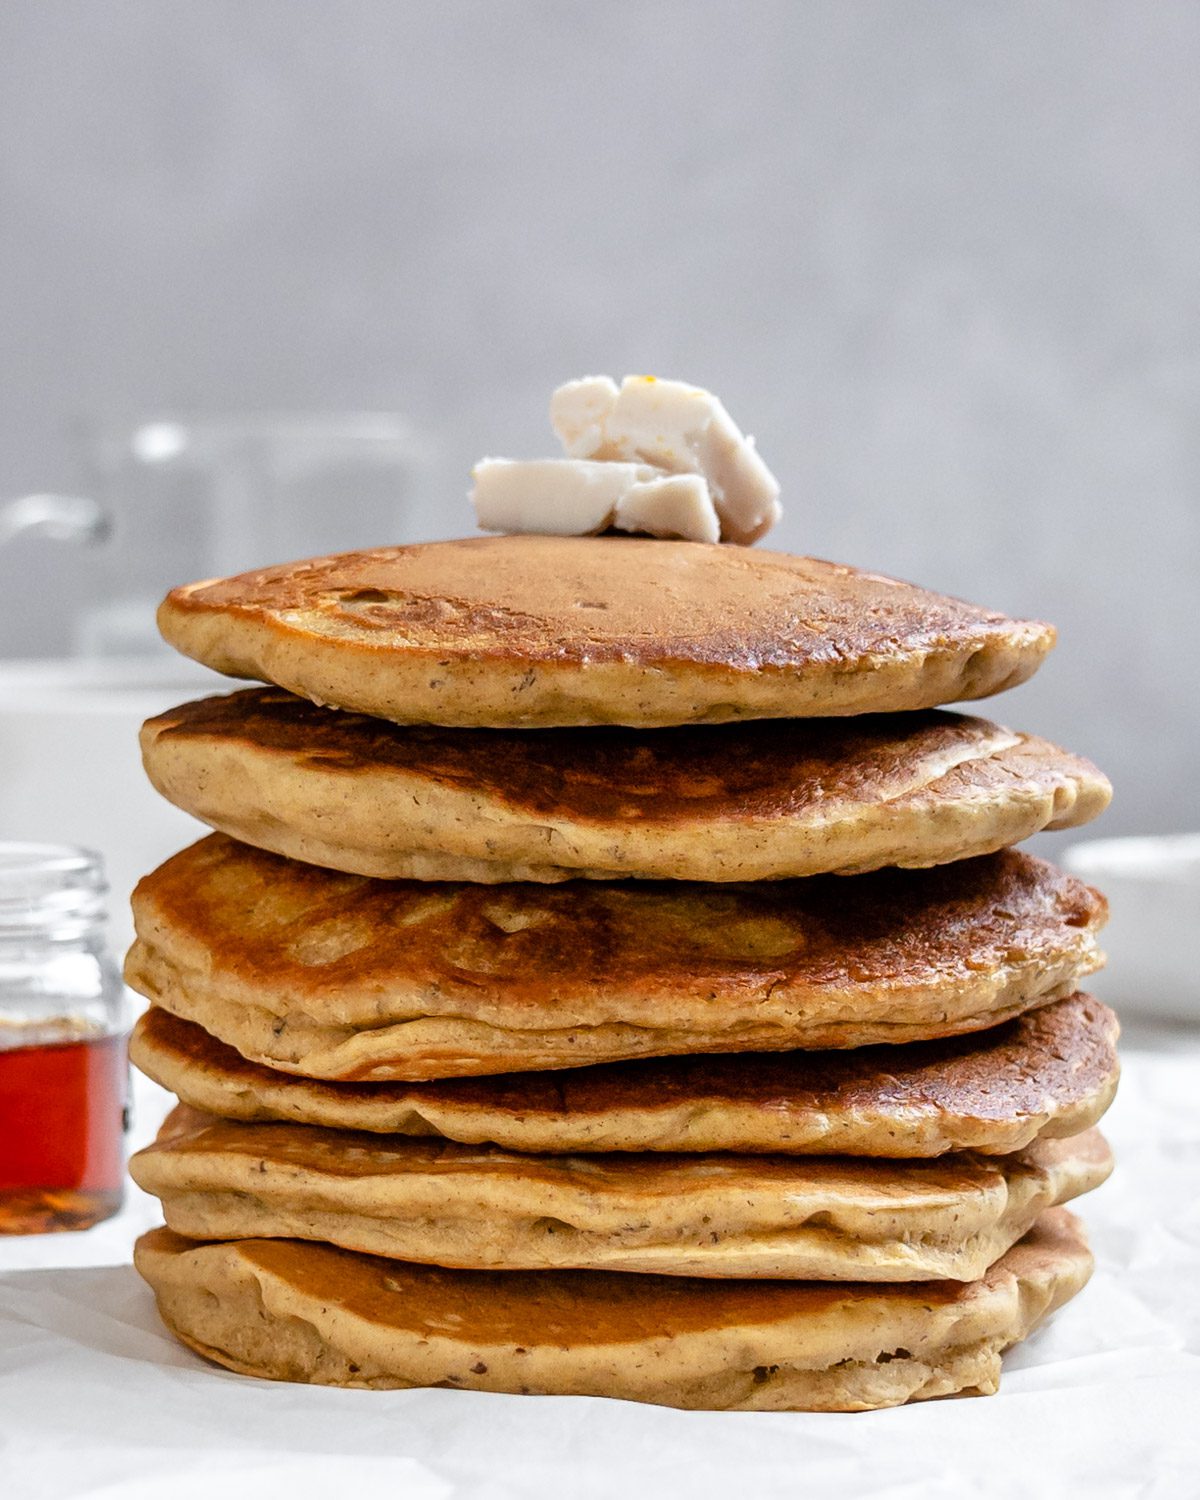 completed stack of Vegan Pumpkin Pancakes against a white background with vegan butter on top